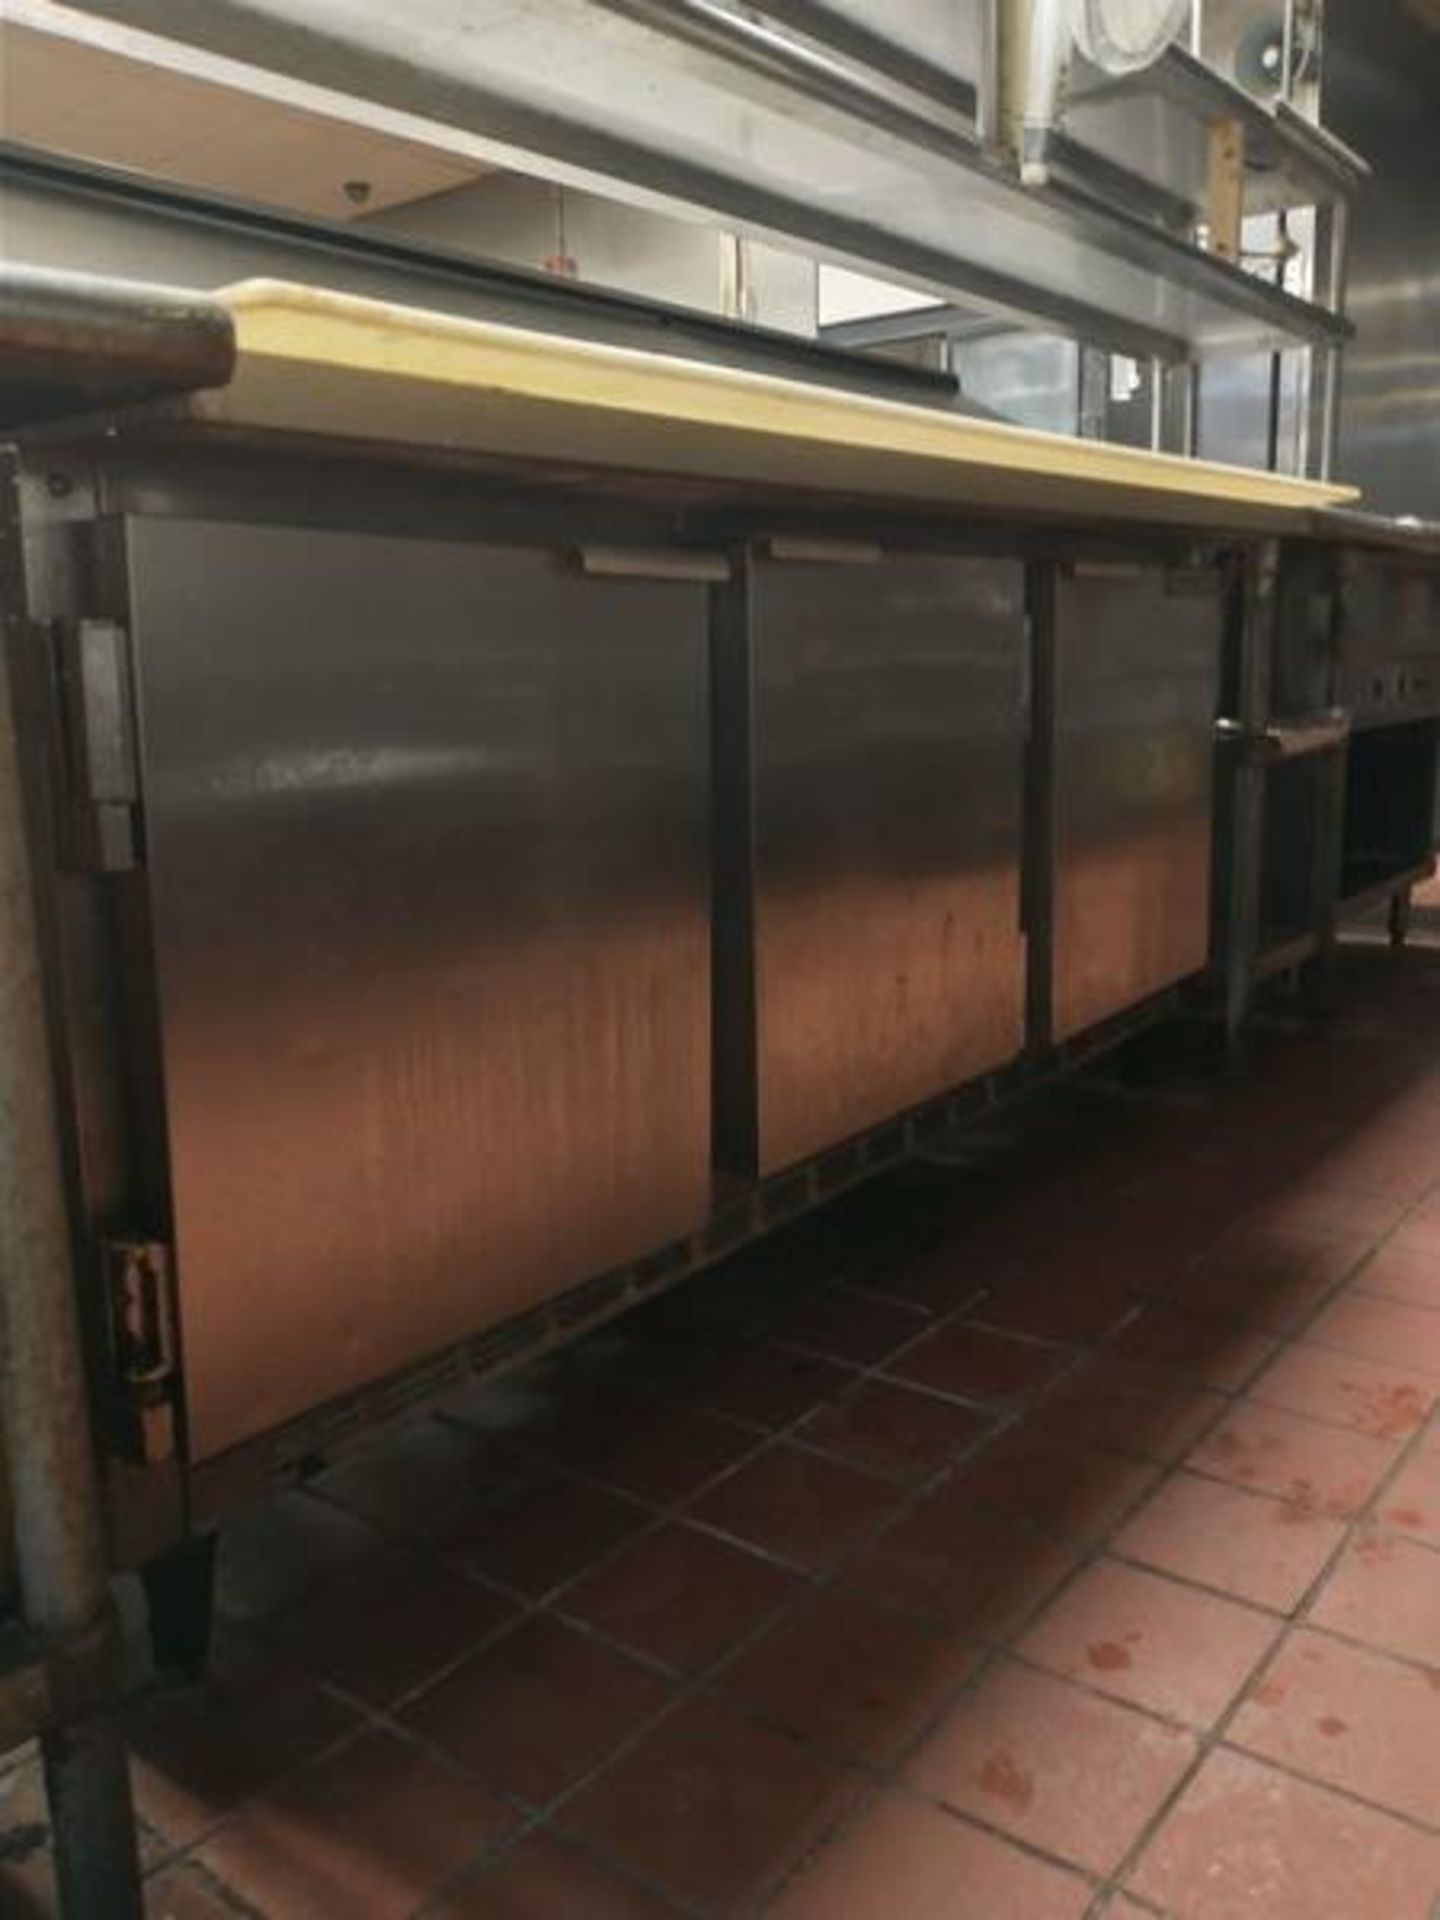 11' X 36" REFRIGERATED SANDWICH TABLE AND 6' RICE COOKING UNIT WITH DRYBIN AND OVEN SHELVES - Image 2 of 6